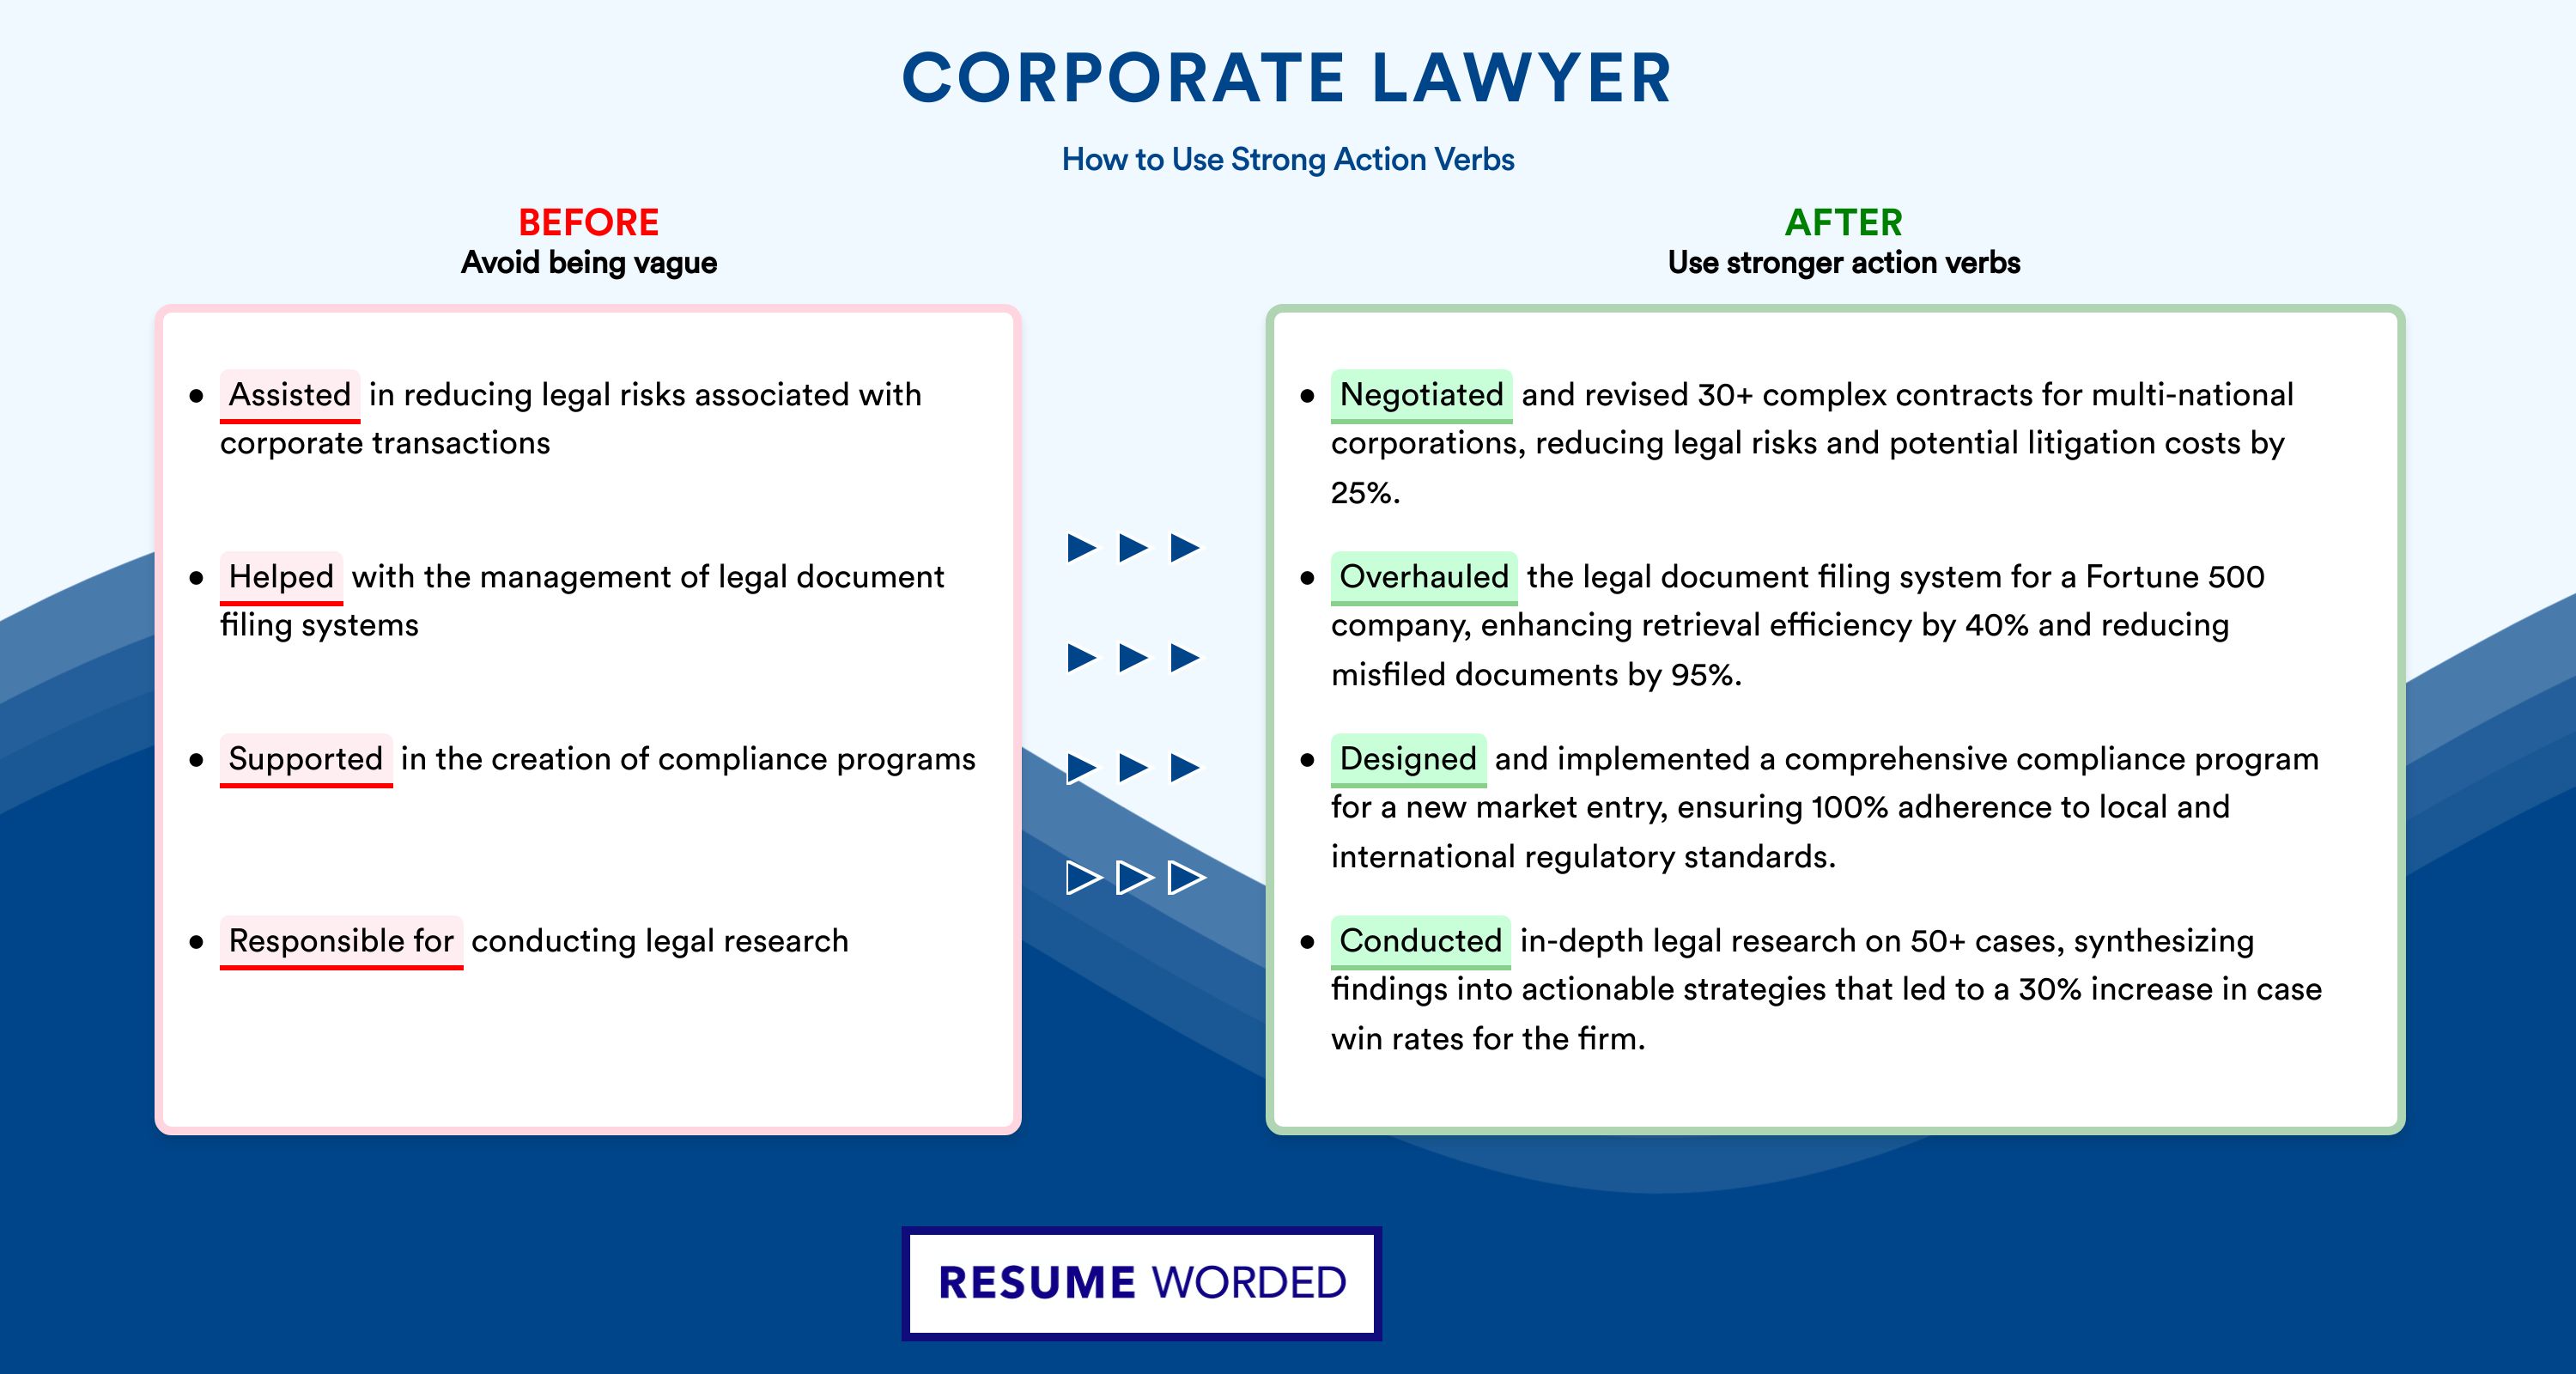 Action Verbs for Corporate Lawyer